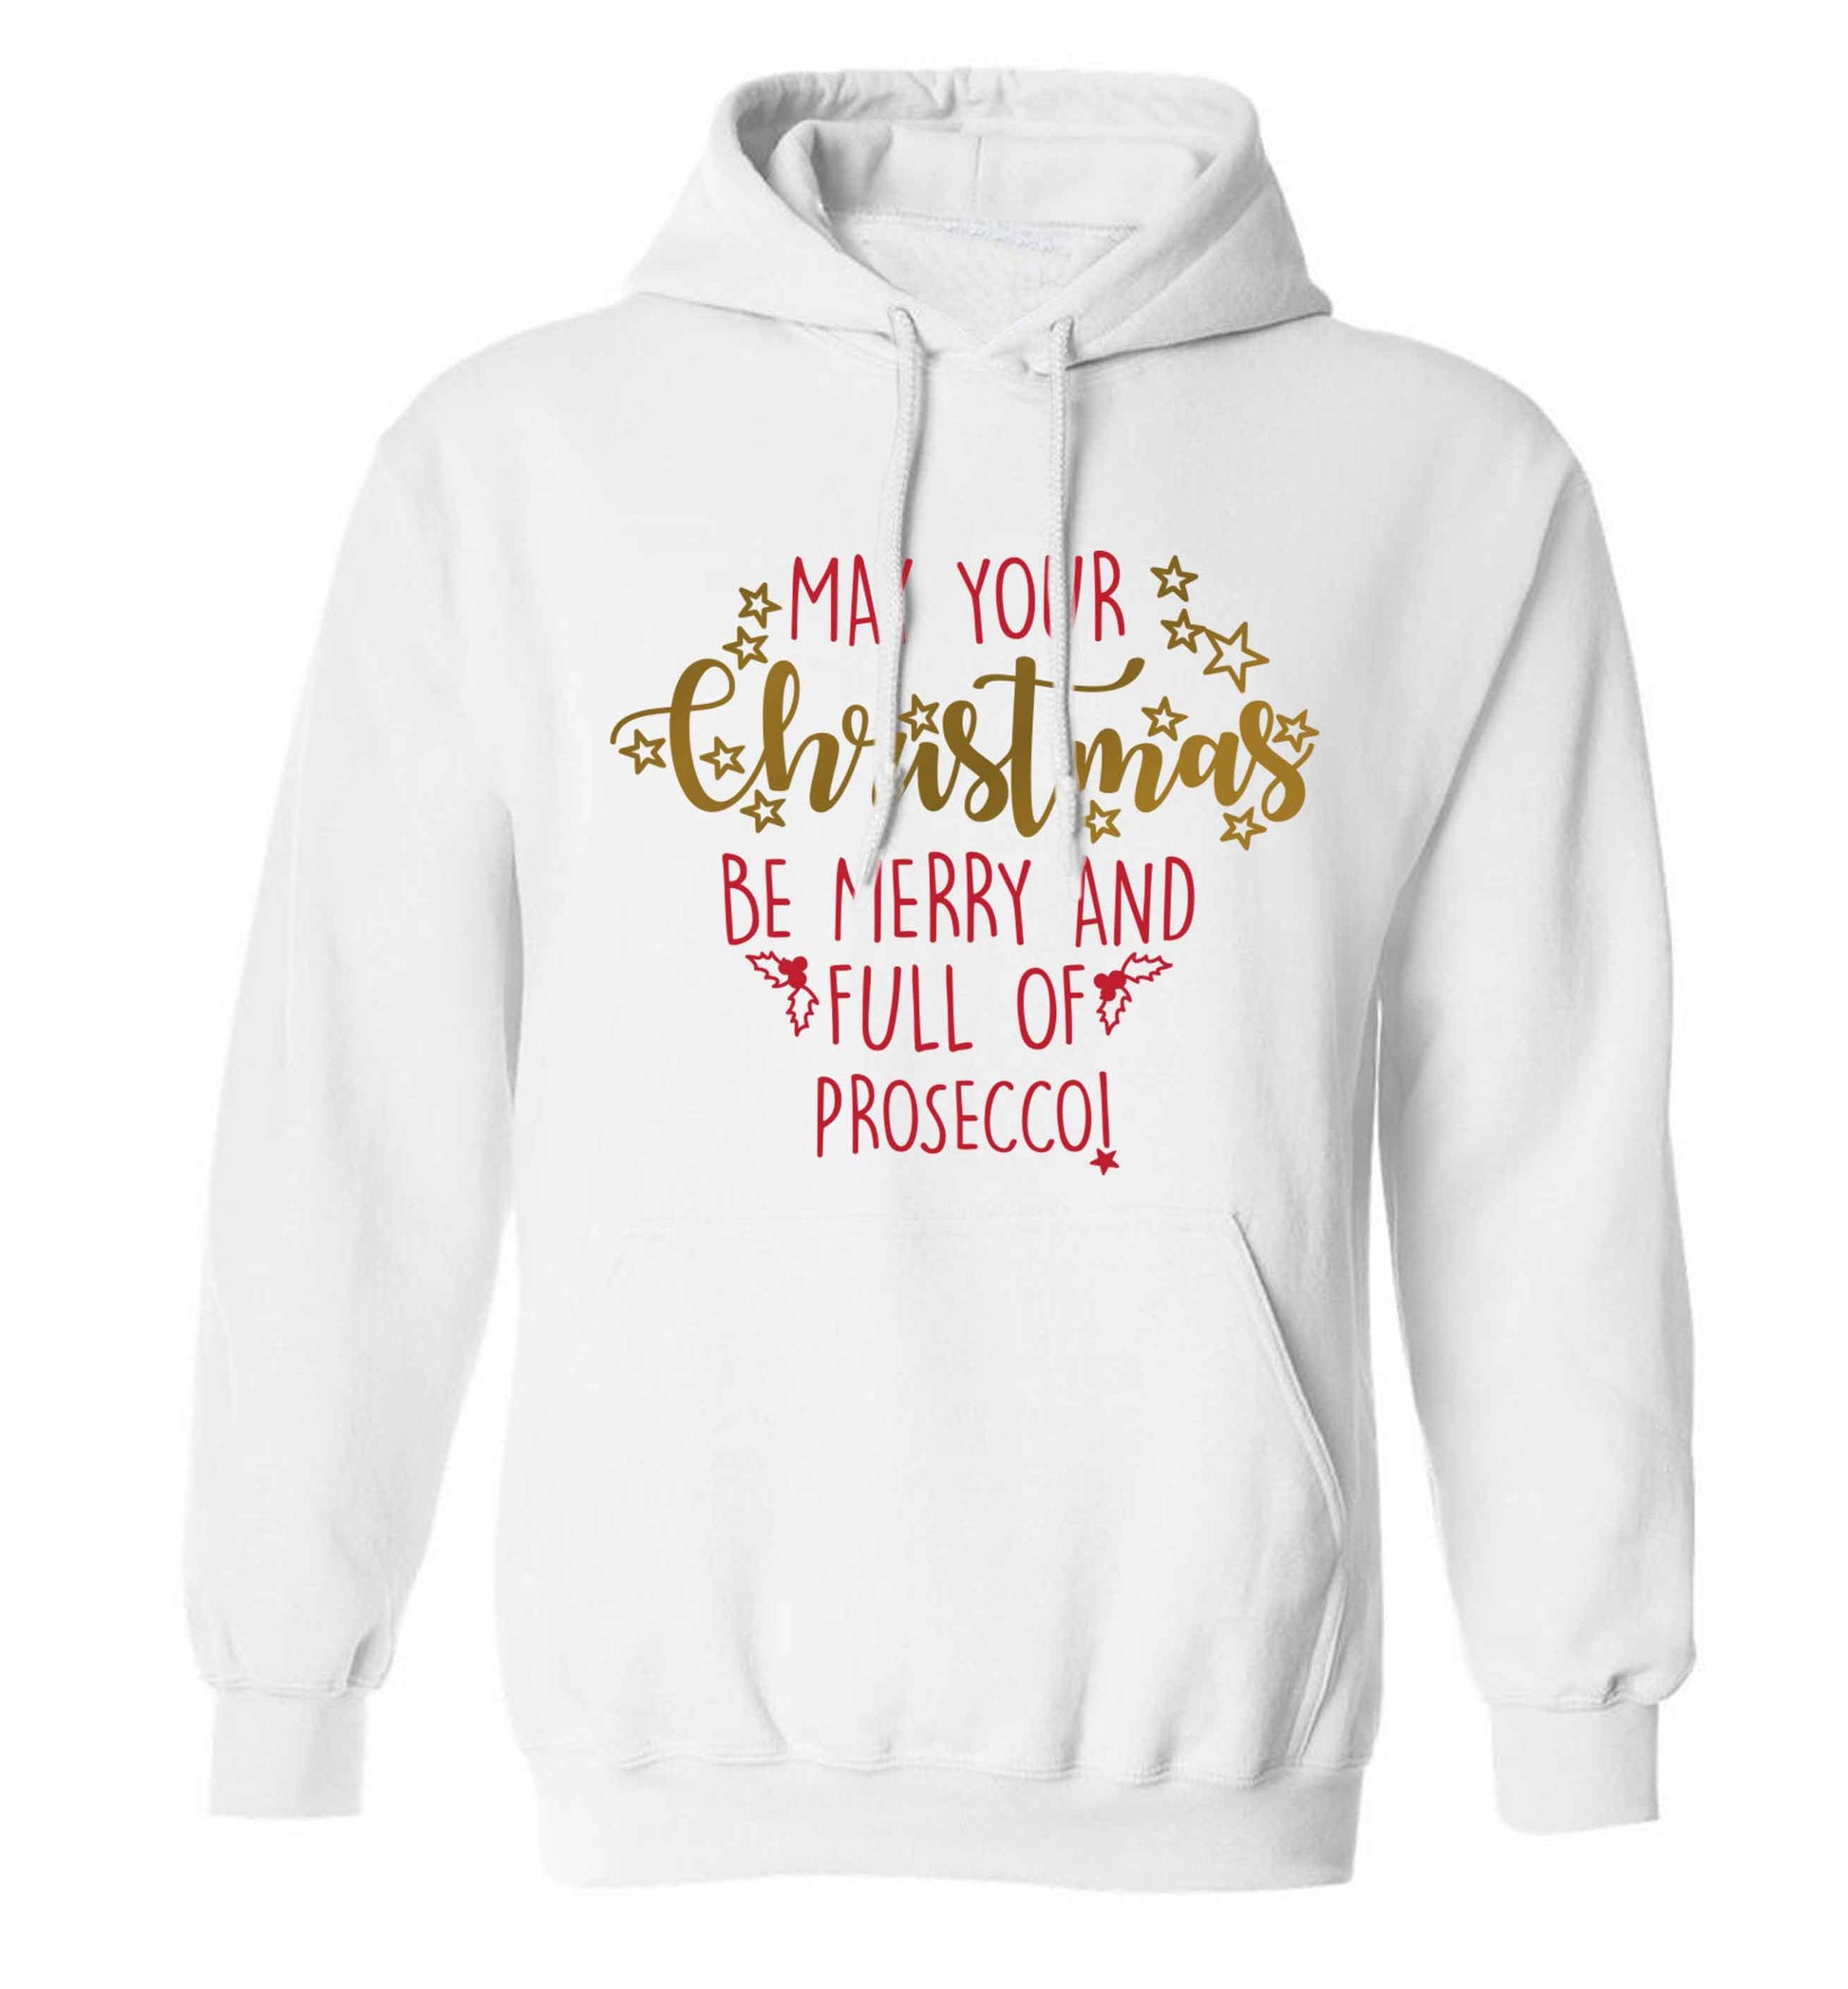 May your Christmas be merry and full of prosecco adults unisex white hoodie 2XL